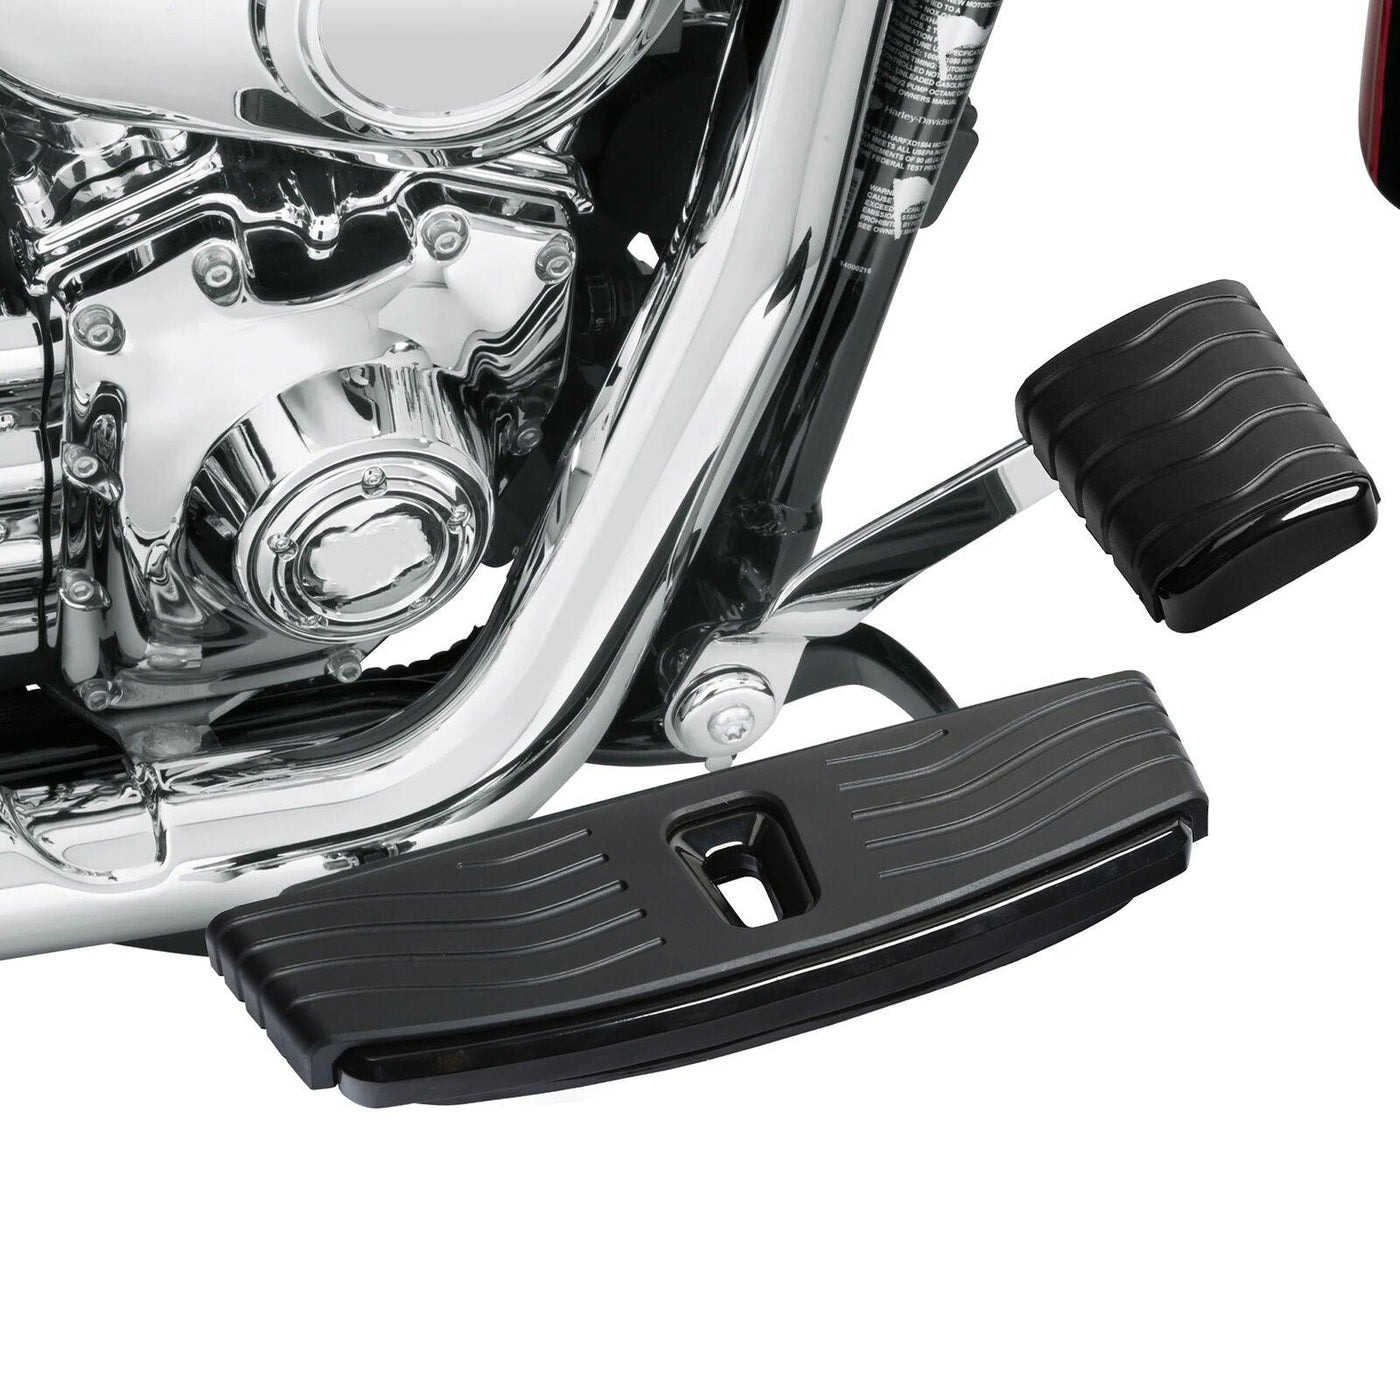 Black Brake Pedal Pad Fit For Harley Dyna Switchback Softail Touring Road Glide - Moto Life Products